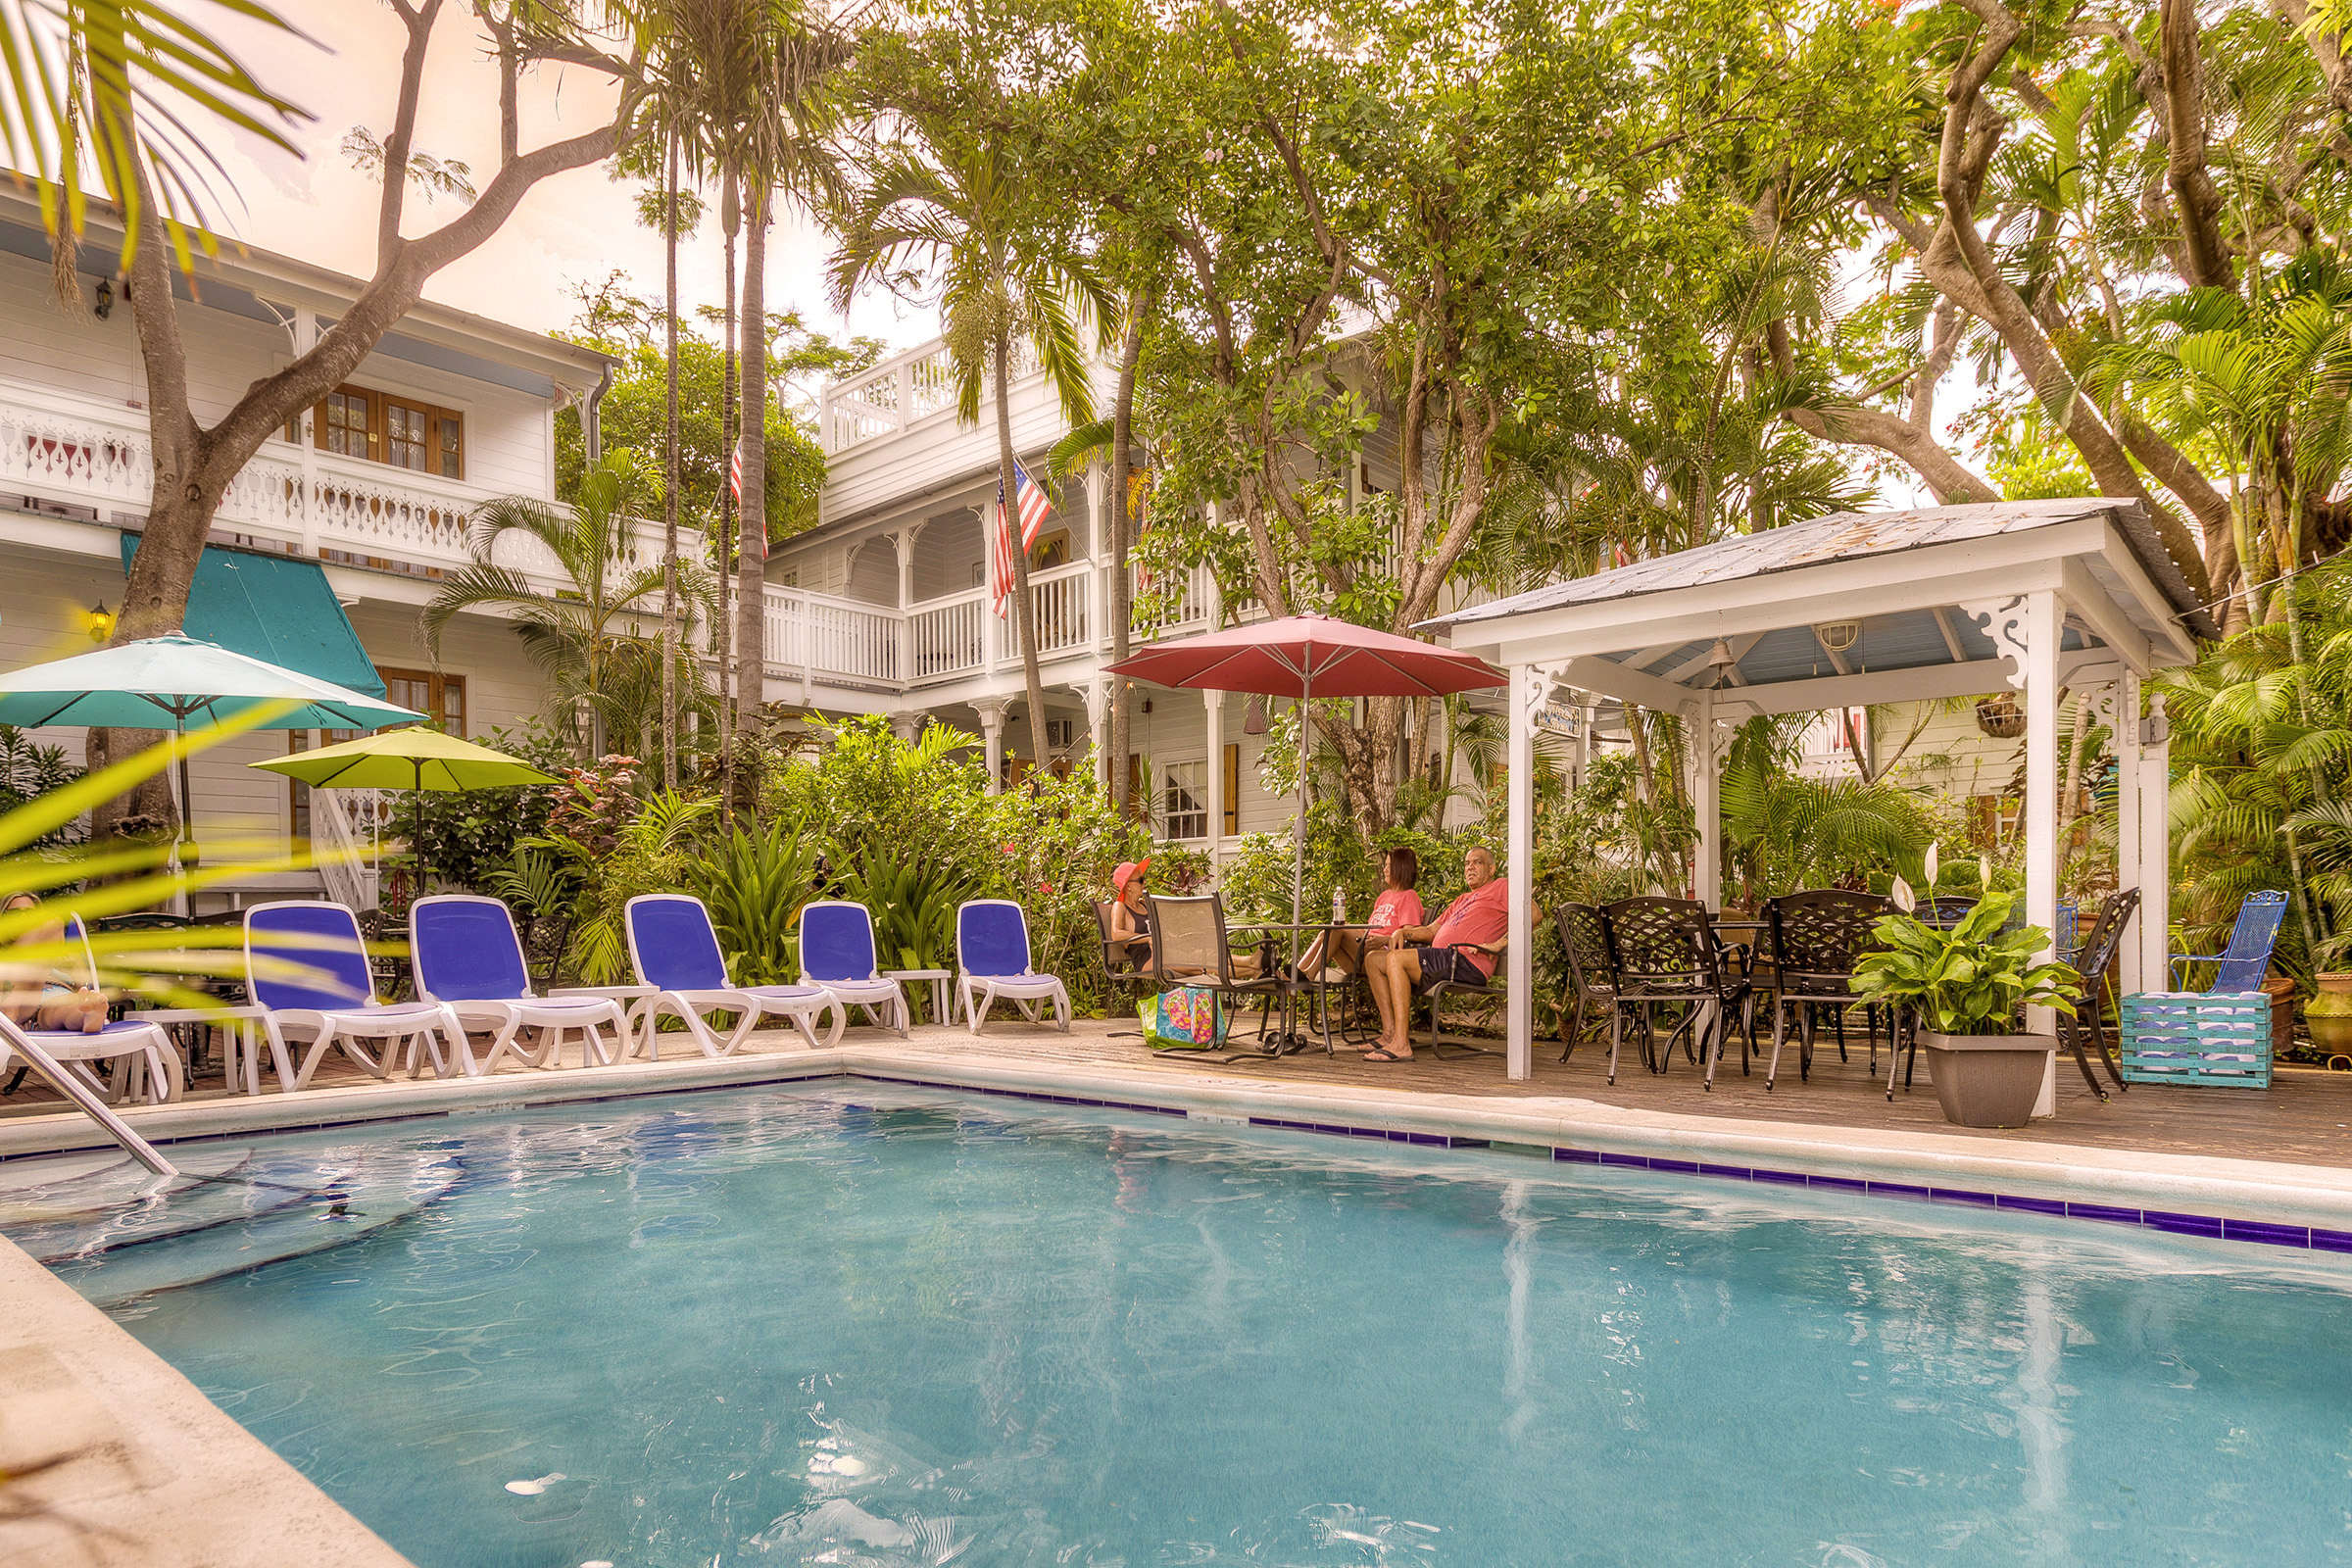 Key West Resort | Bed and Breakfast | Guesthouse | Old Town | Duval St